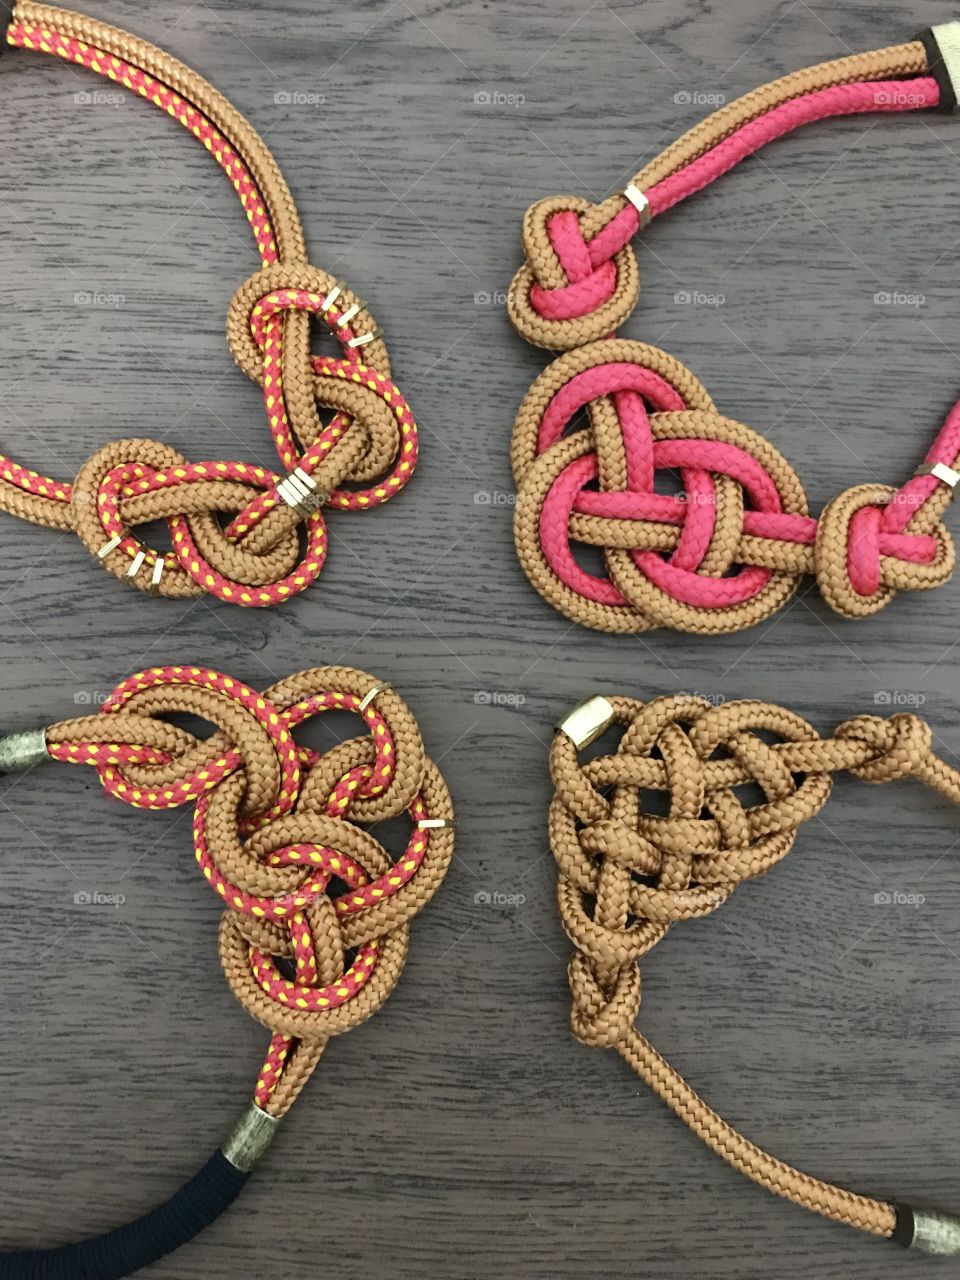 Necklace knot 